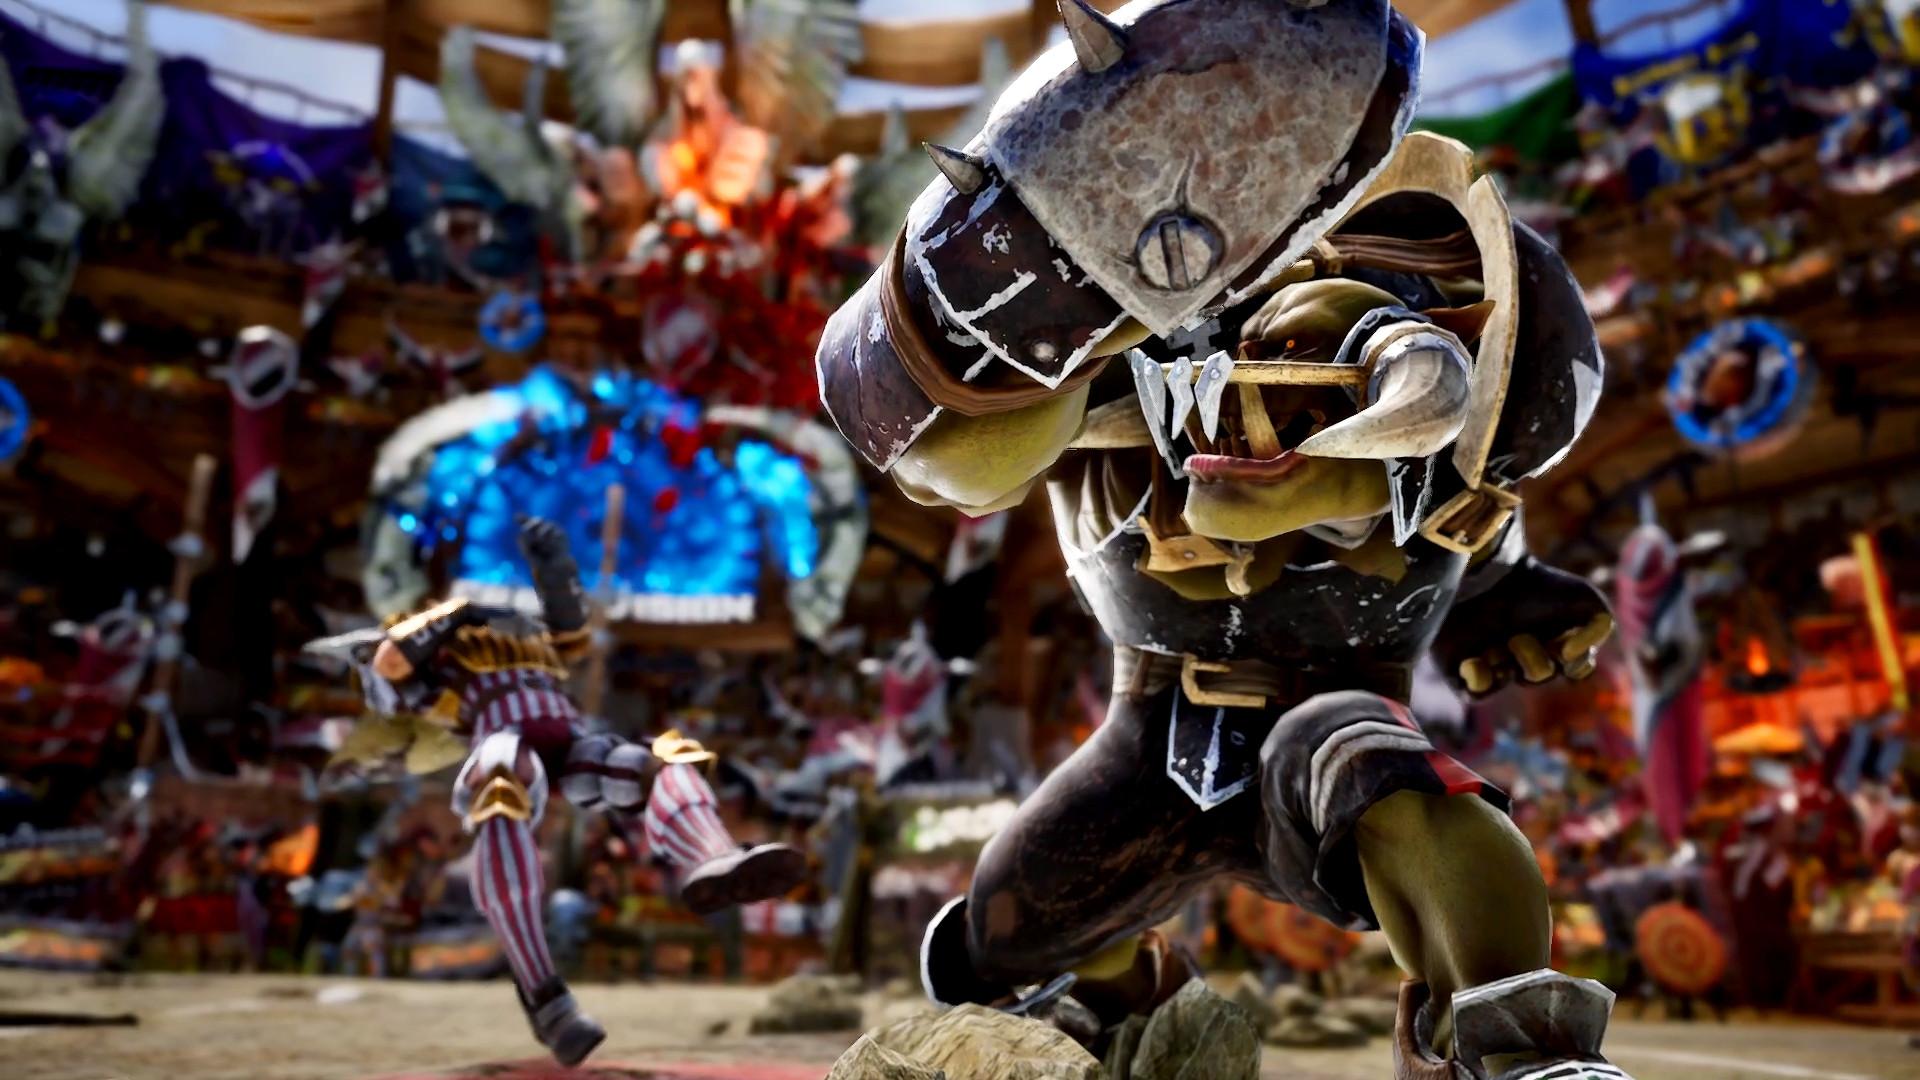 Blood Bowl 3: Black Orcs Edition Steam Altergift